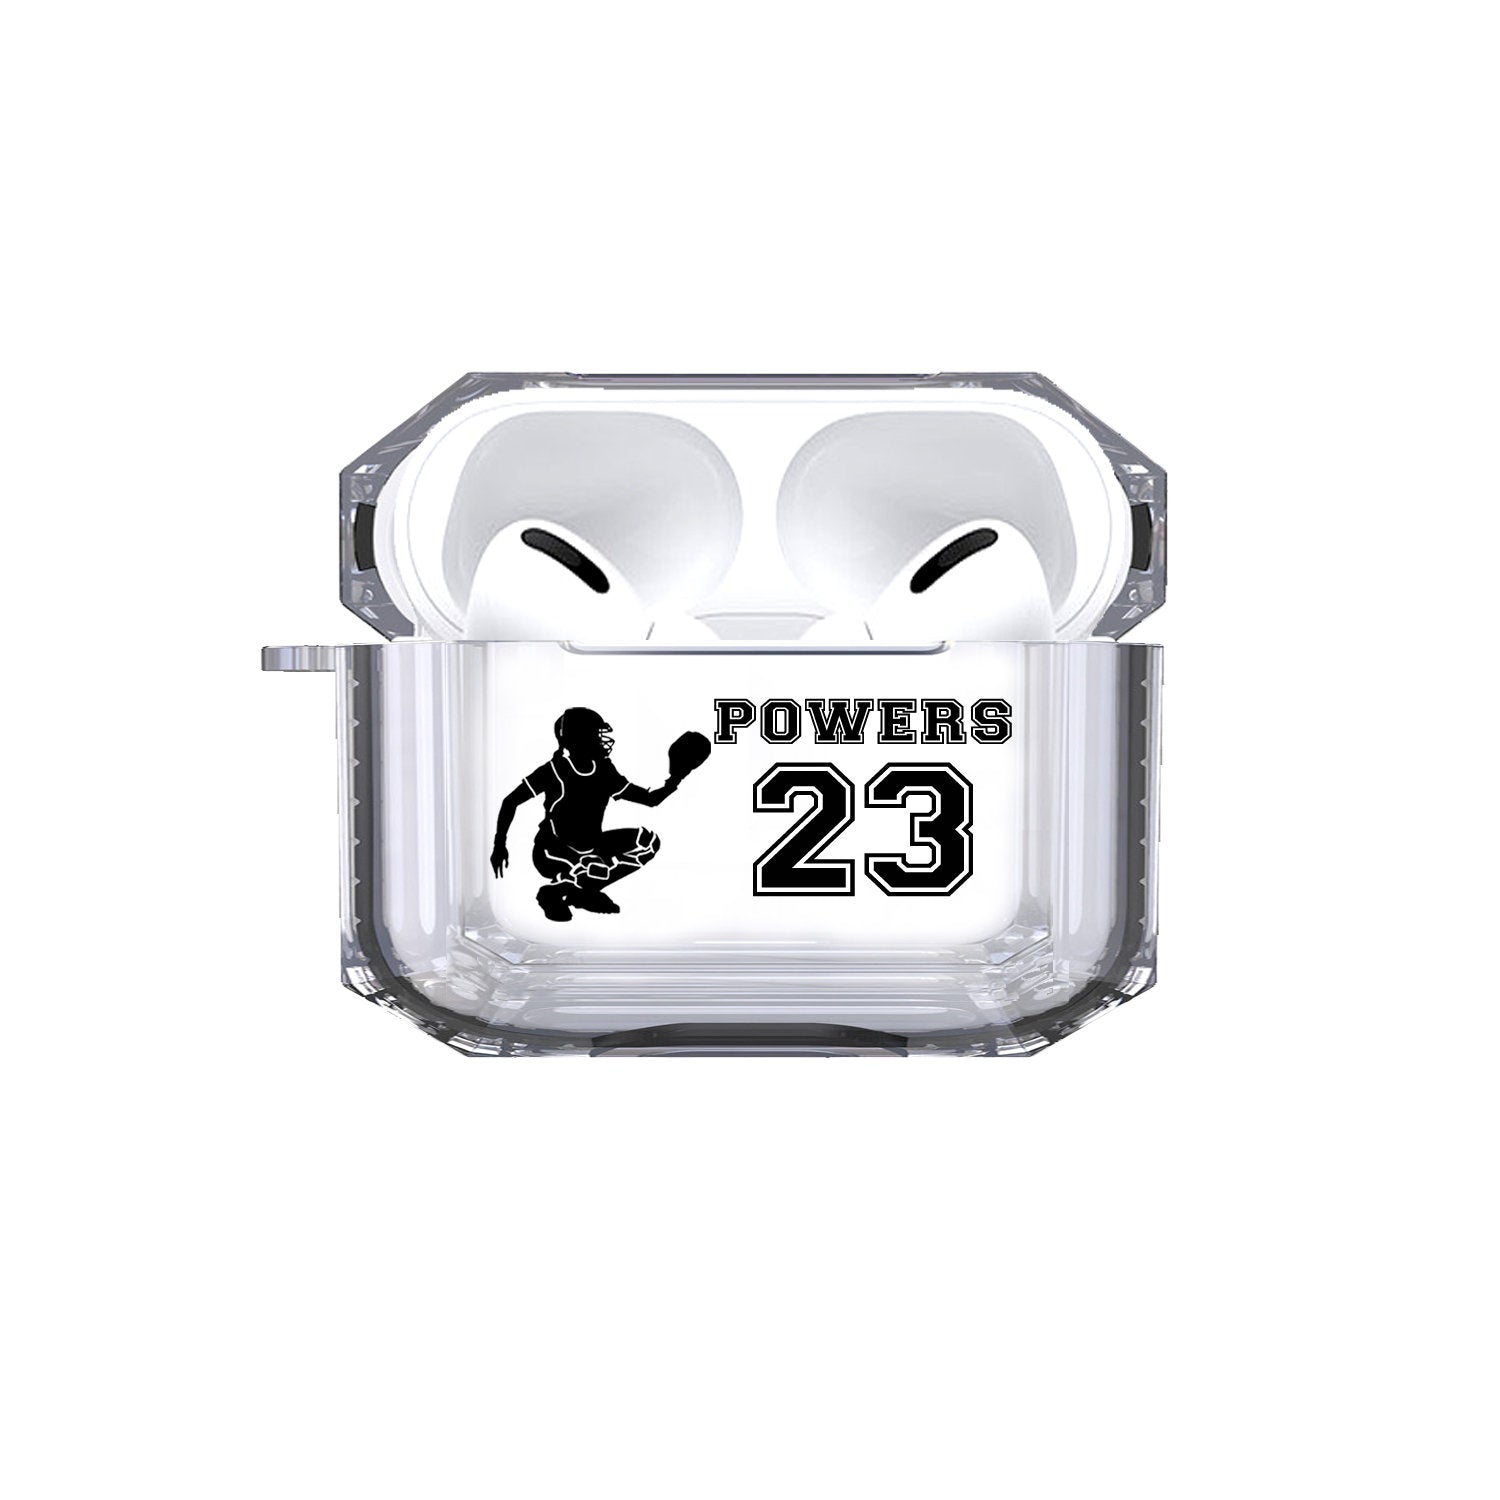 Protective Customized Sports Airpods Pro Case Softball Catcher Name Number Air pod Pro Personalized Gift for Softball Player Mom Coach Gift